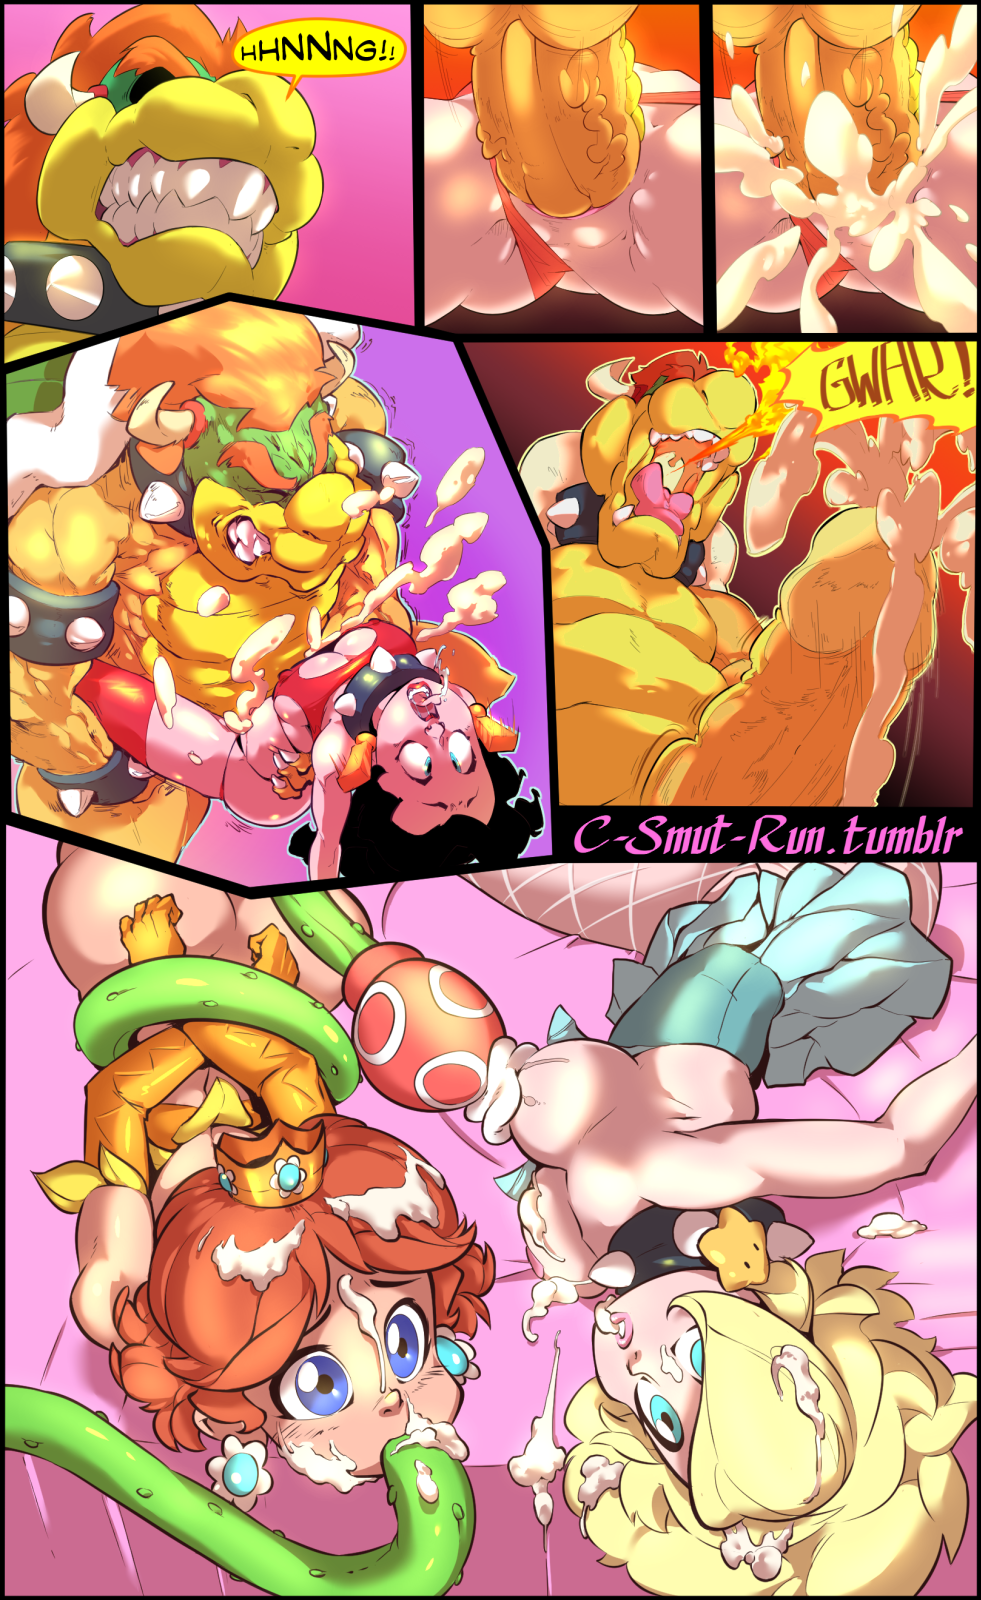 Peach gets pounded bowser